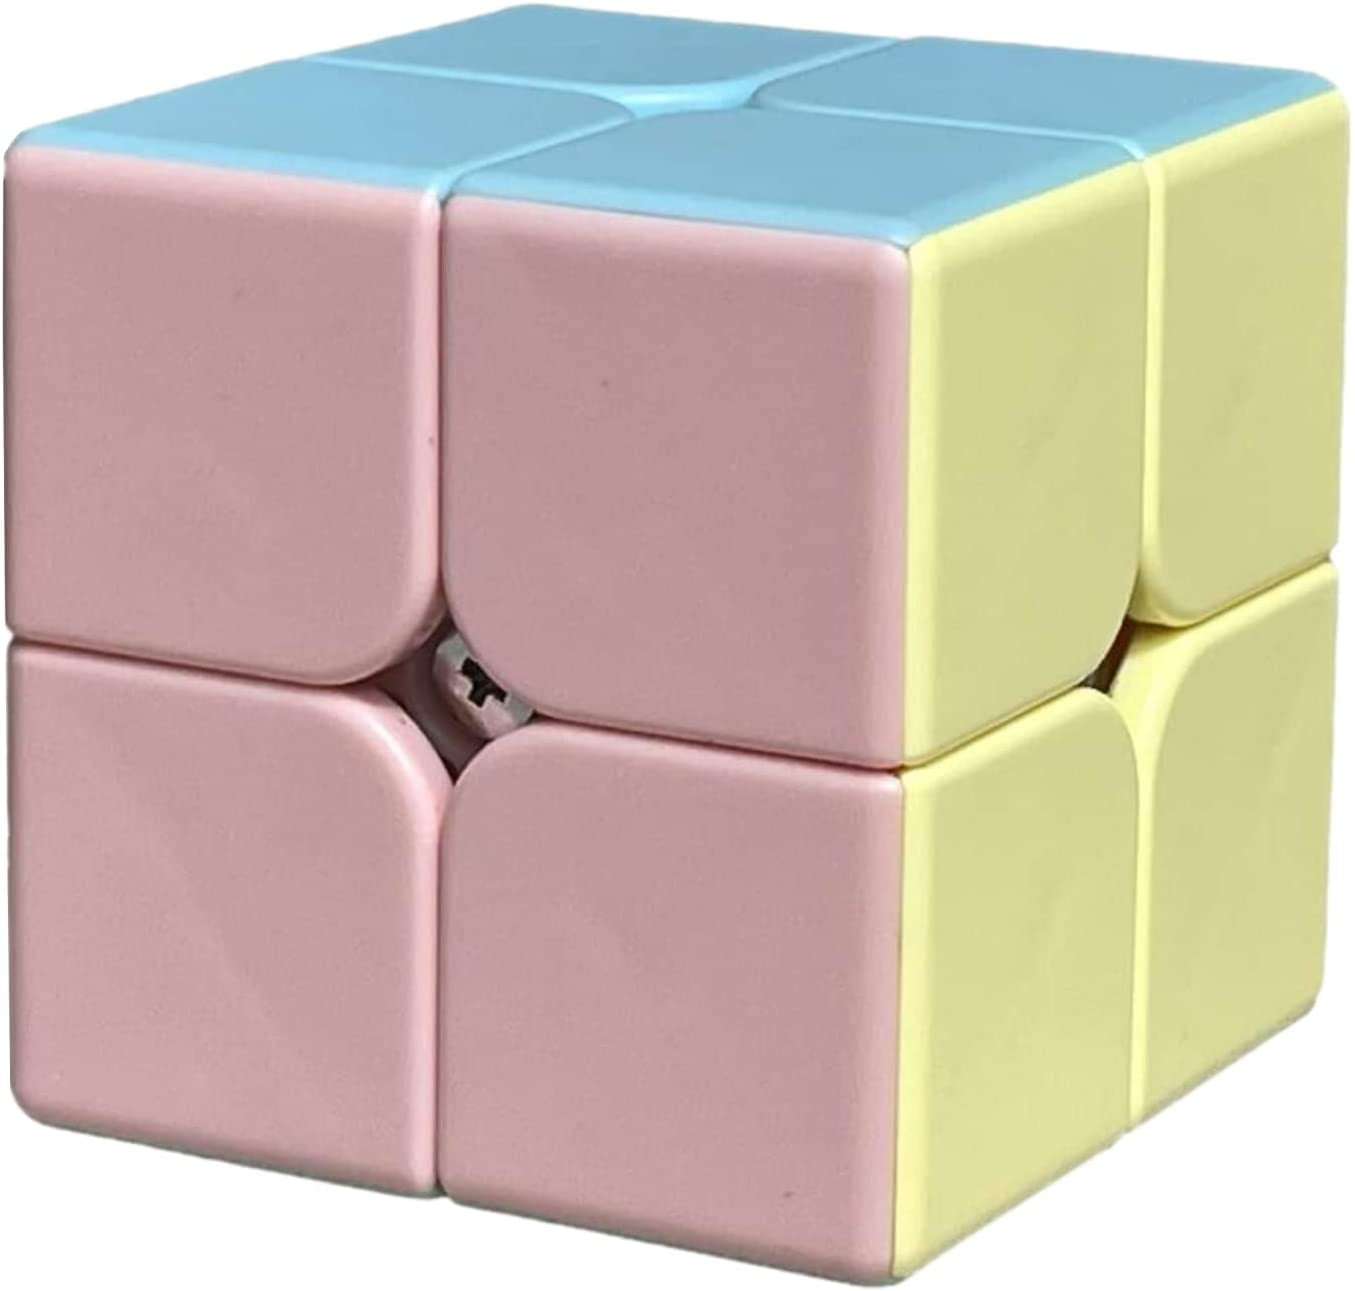 Stickerless Magic Cube 2x2x2 Pocket Cube Smooth Speed Durable 3D Puzzle Cube Toy for Boys Girls Cooja Rubix Cube 2x2